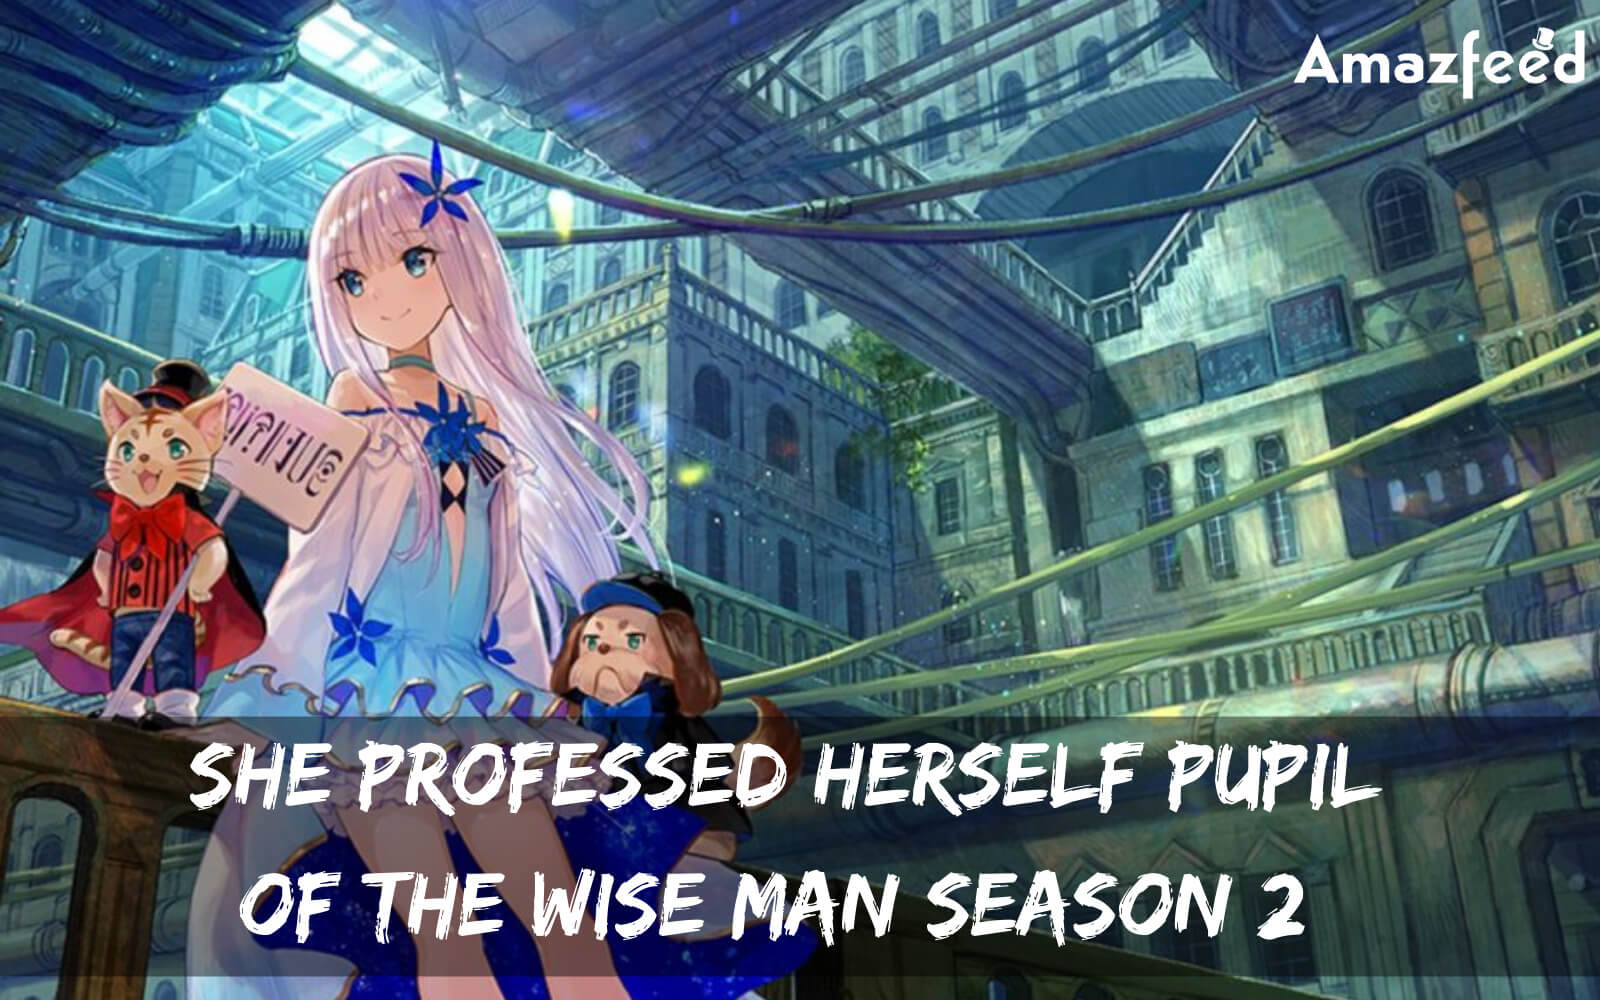 Solomon, She Professed Herself Pupil of the Wise Man Wiki